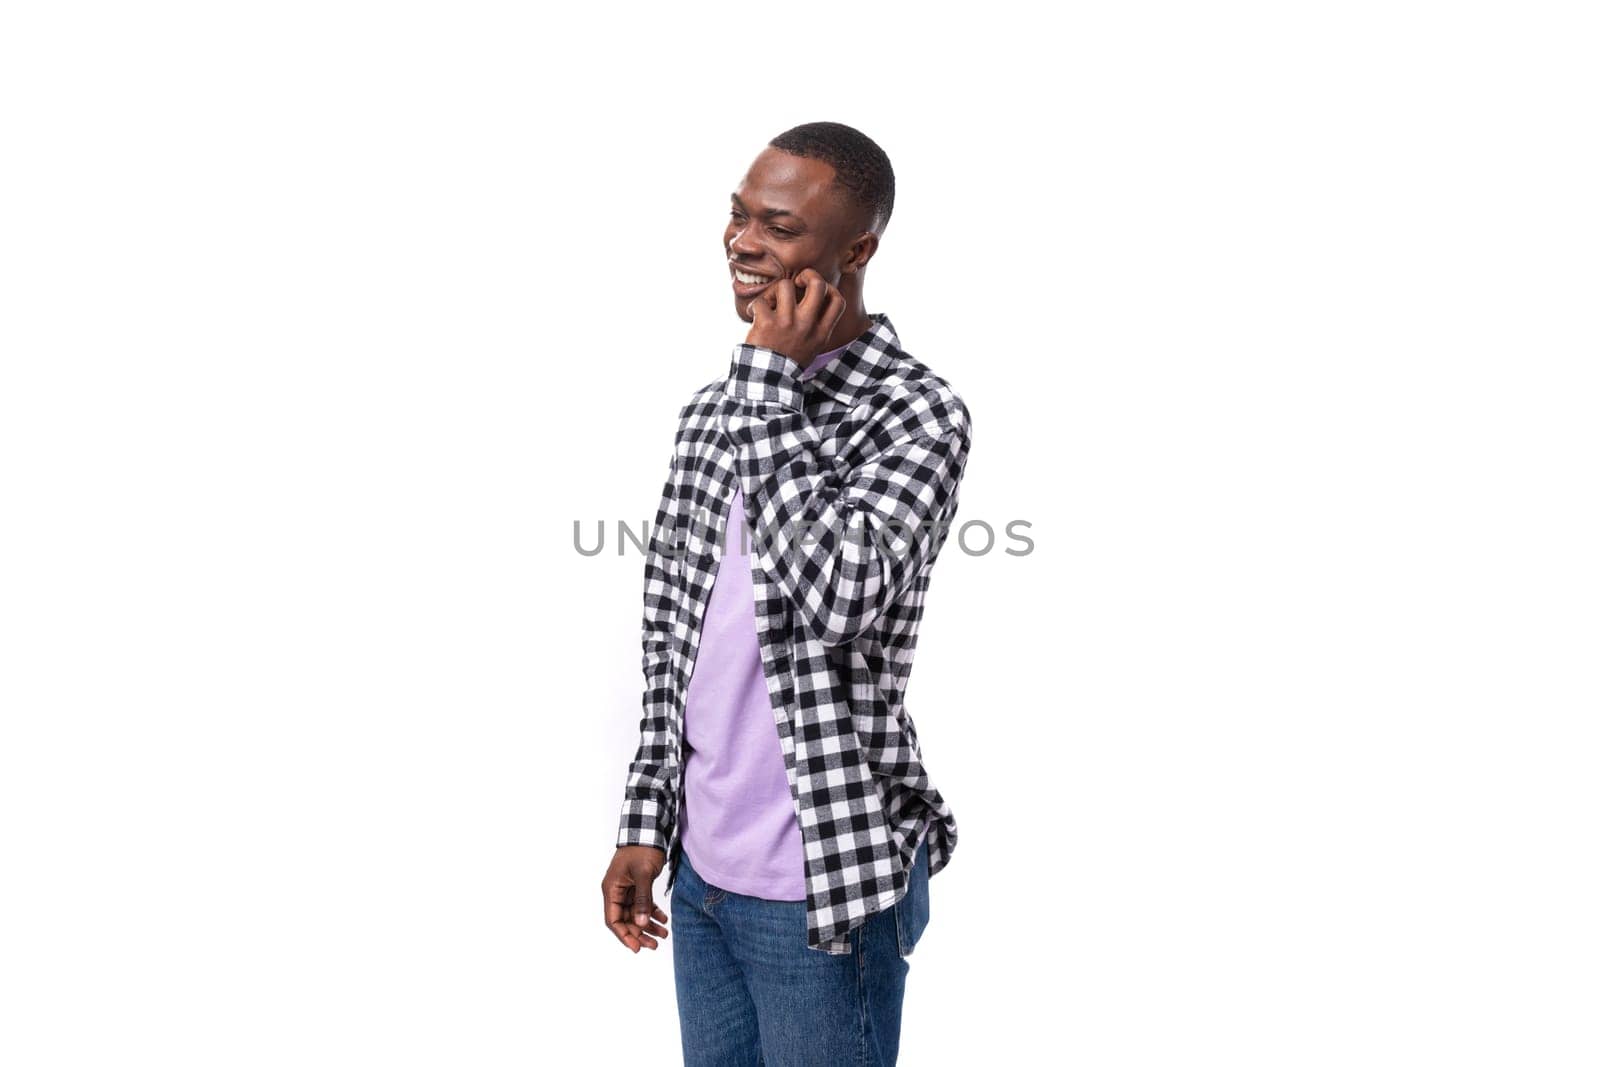 modest shy young american guy with short haircut dressed casually on white background with copy space by TRMK